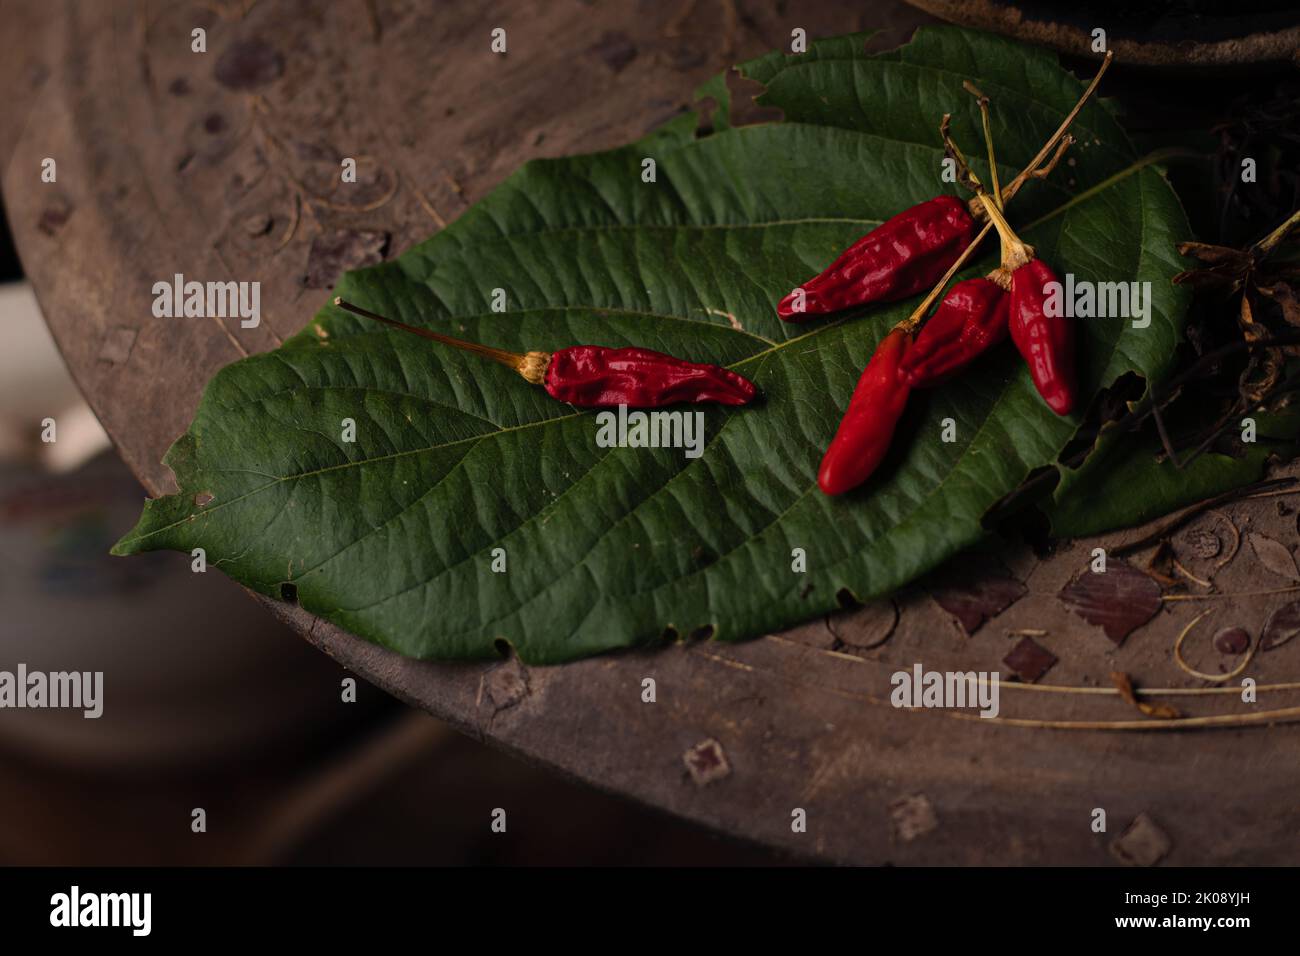 Dried red chilies on a leaf used for cooking shot in low light Stock Photo